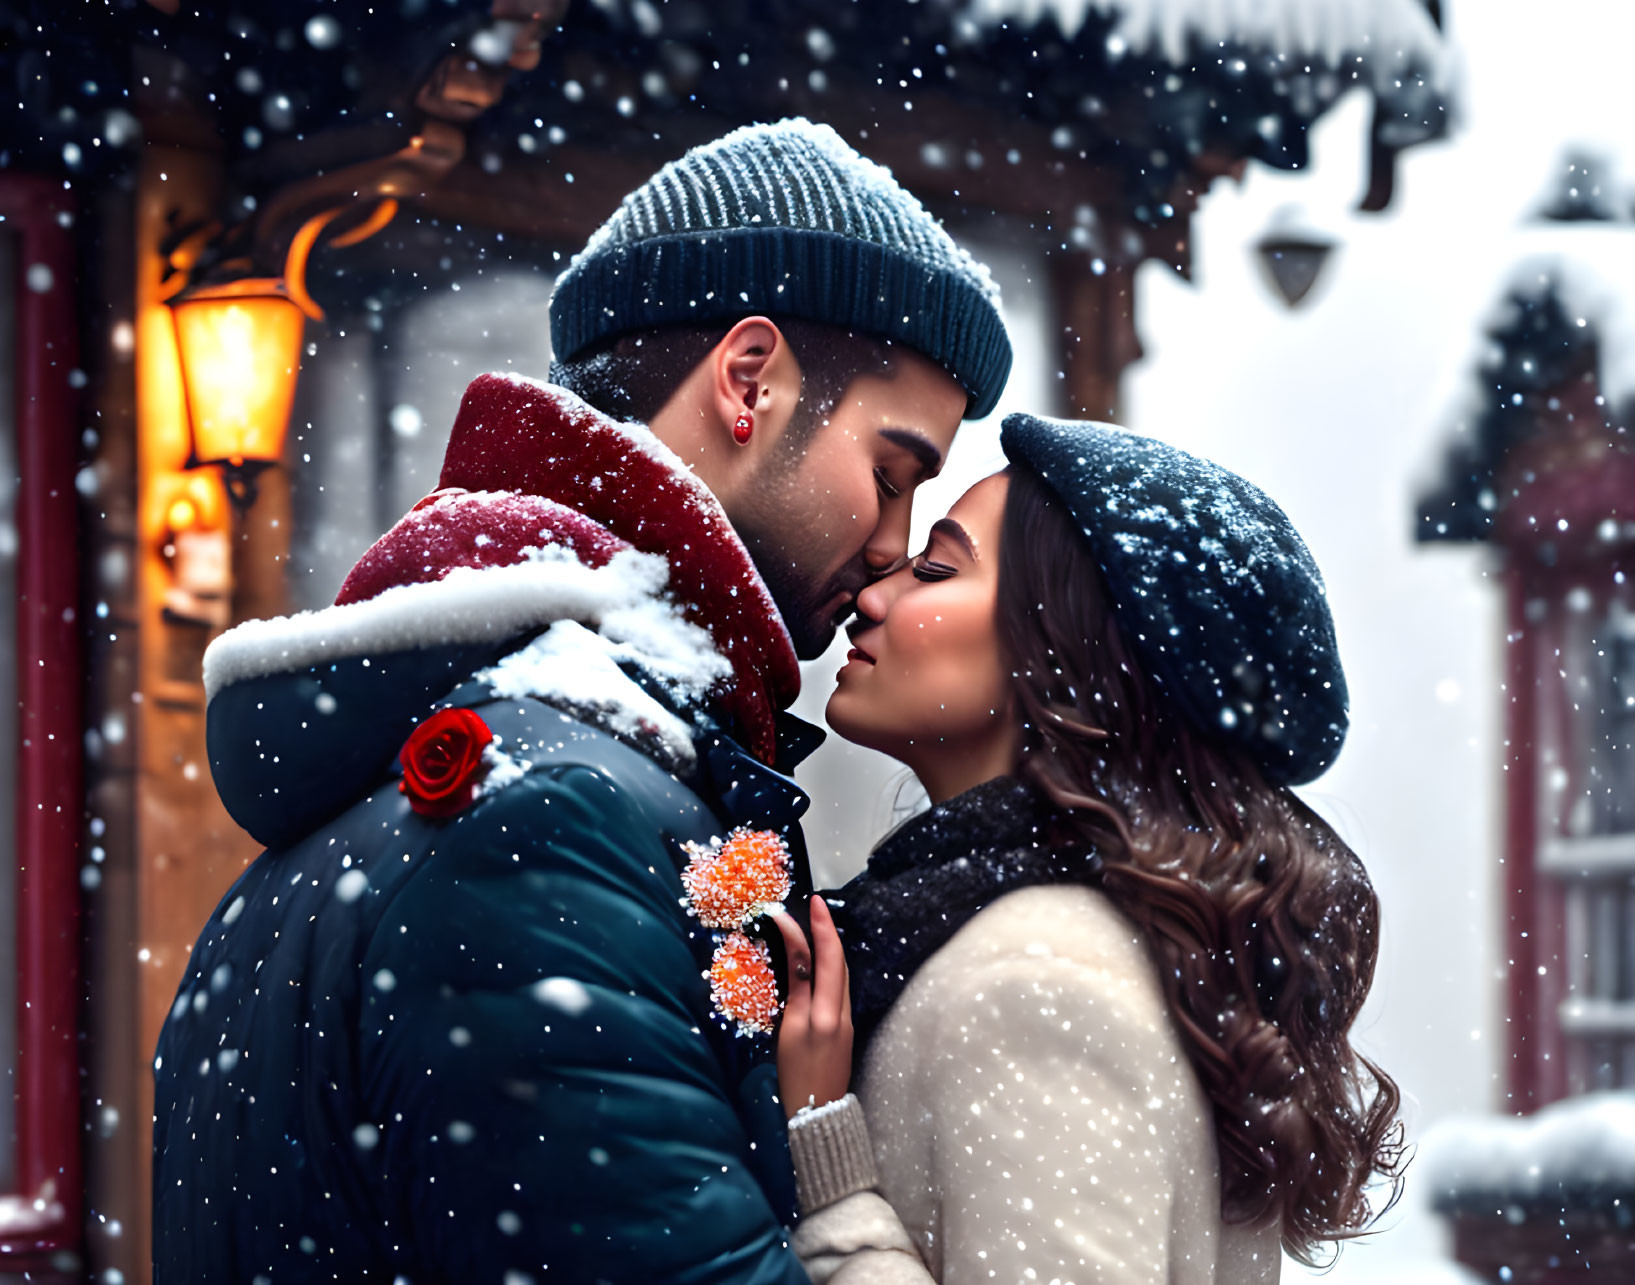 Romantic couple kissing in winter attire with lantern and snowflakes.